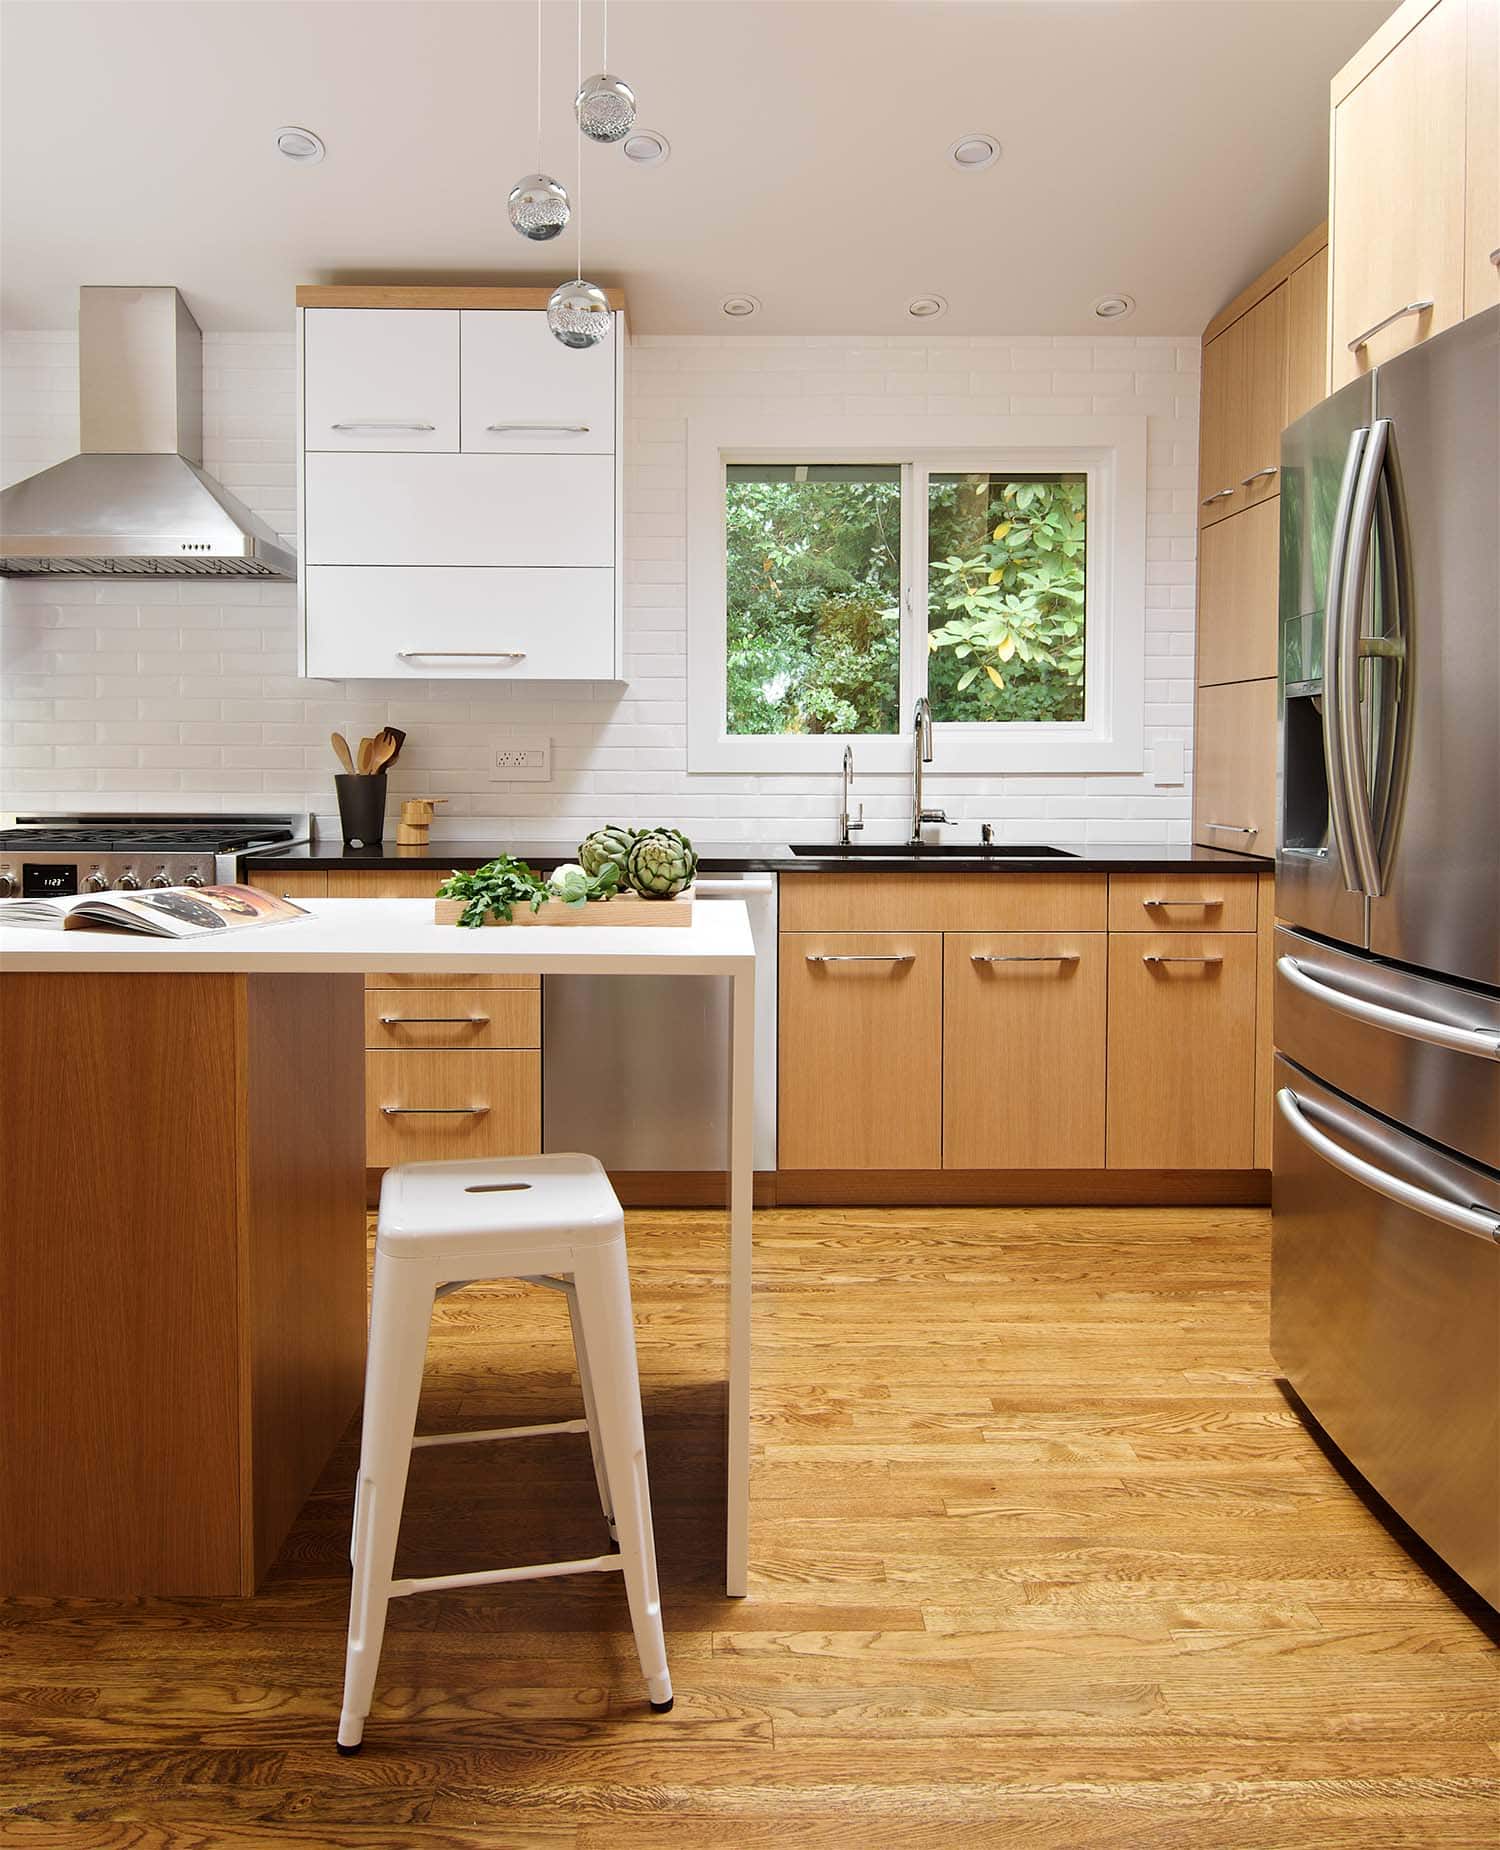 Makswell Construction Mercer Island Kitchen Remodel Seattle Contractor